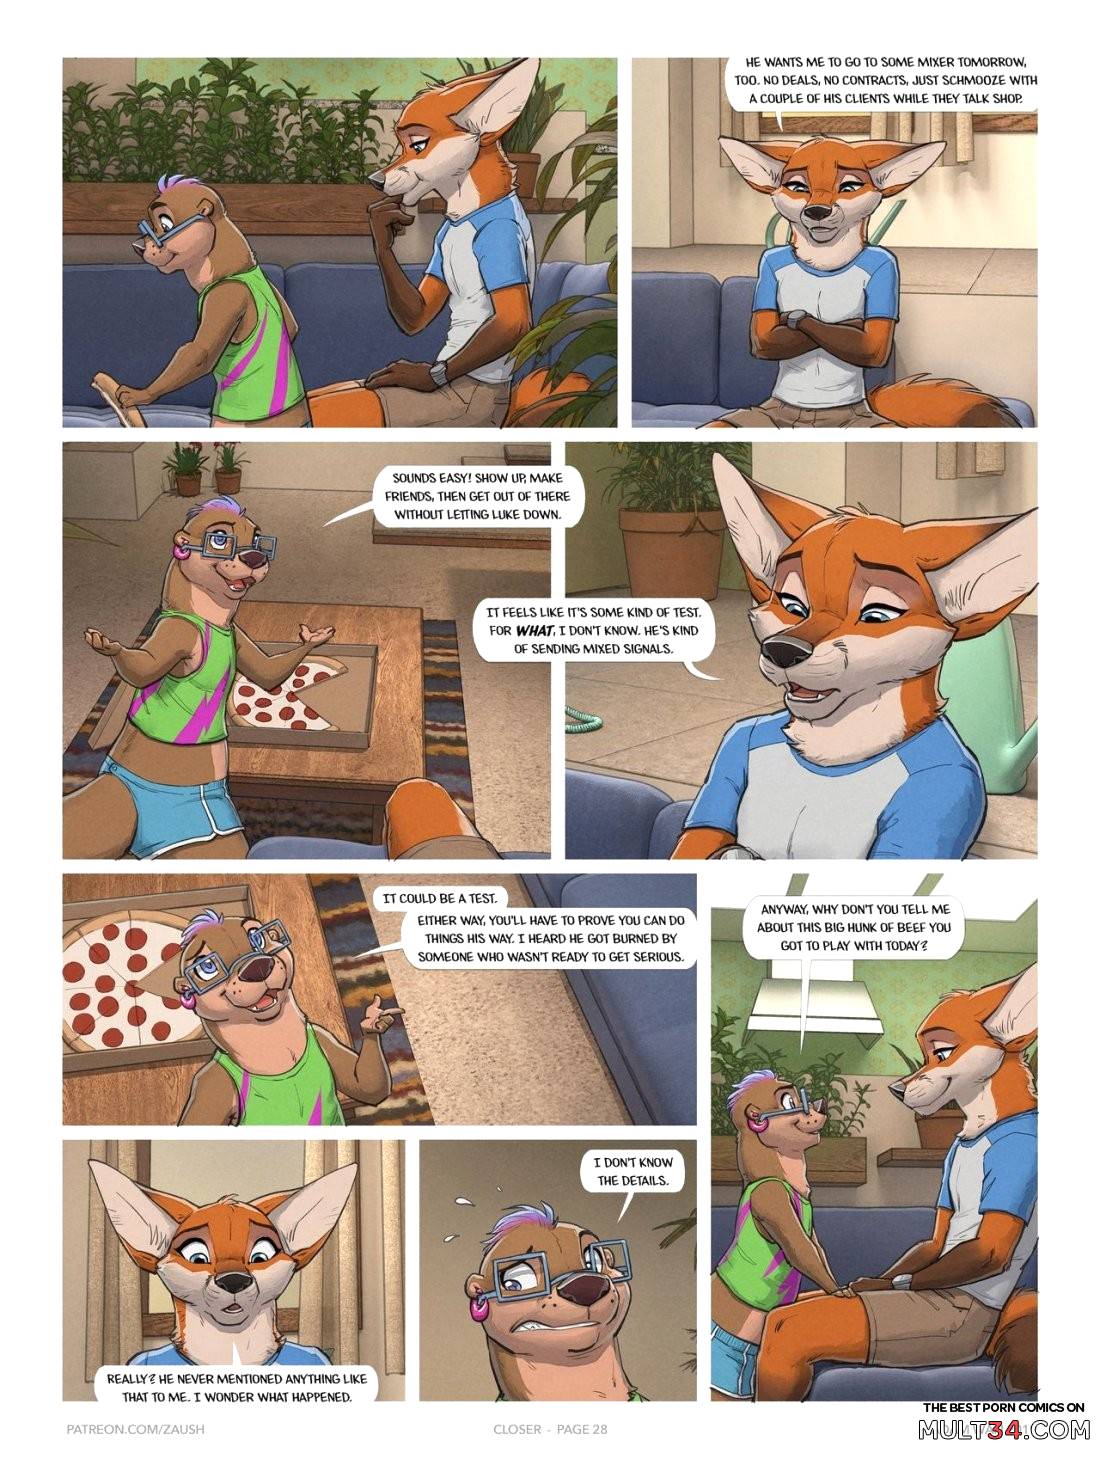 Closer page 28